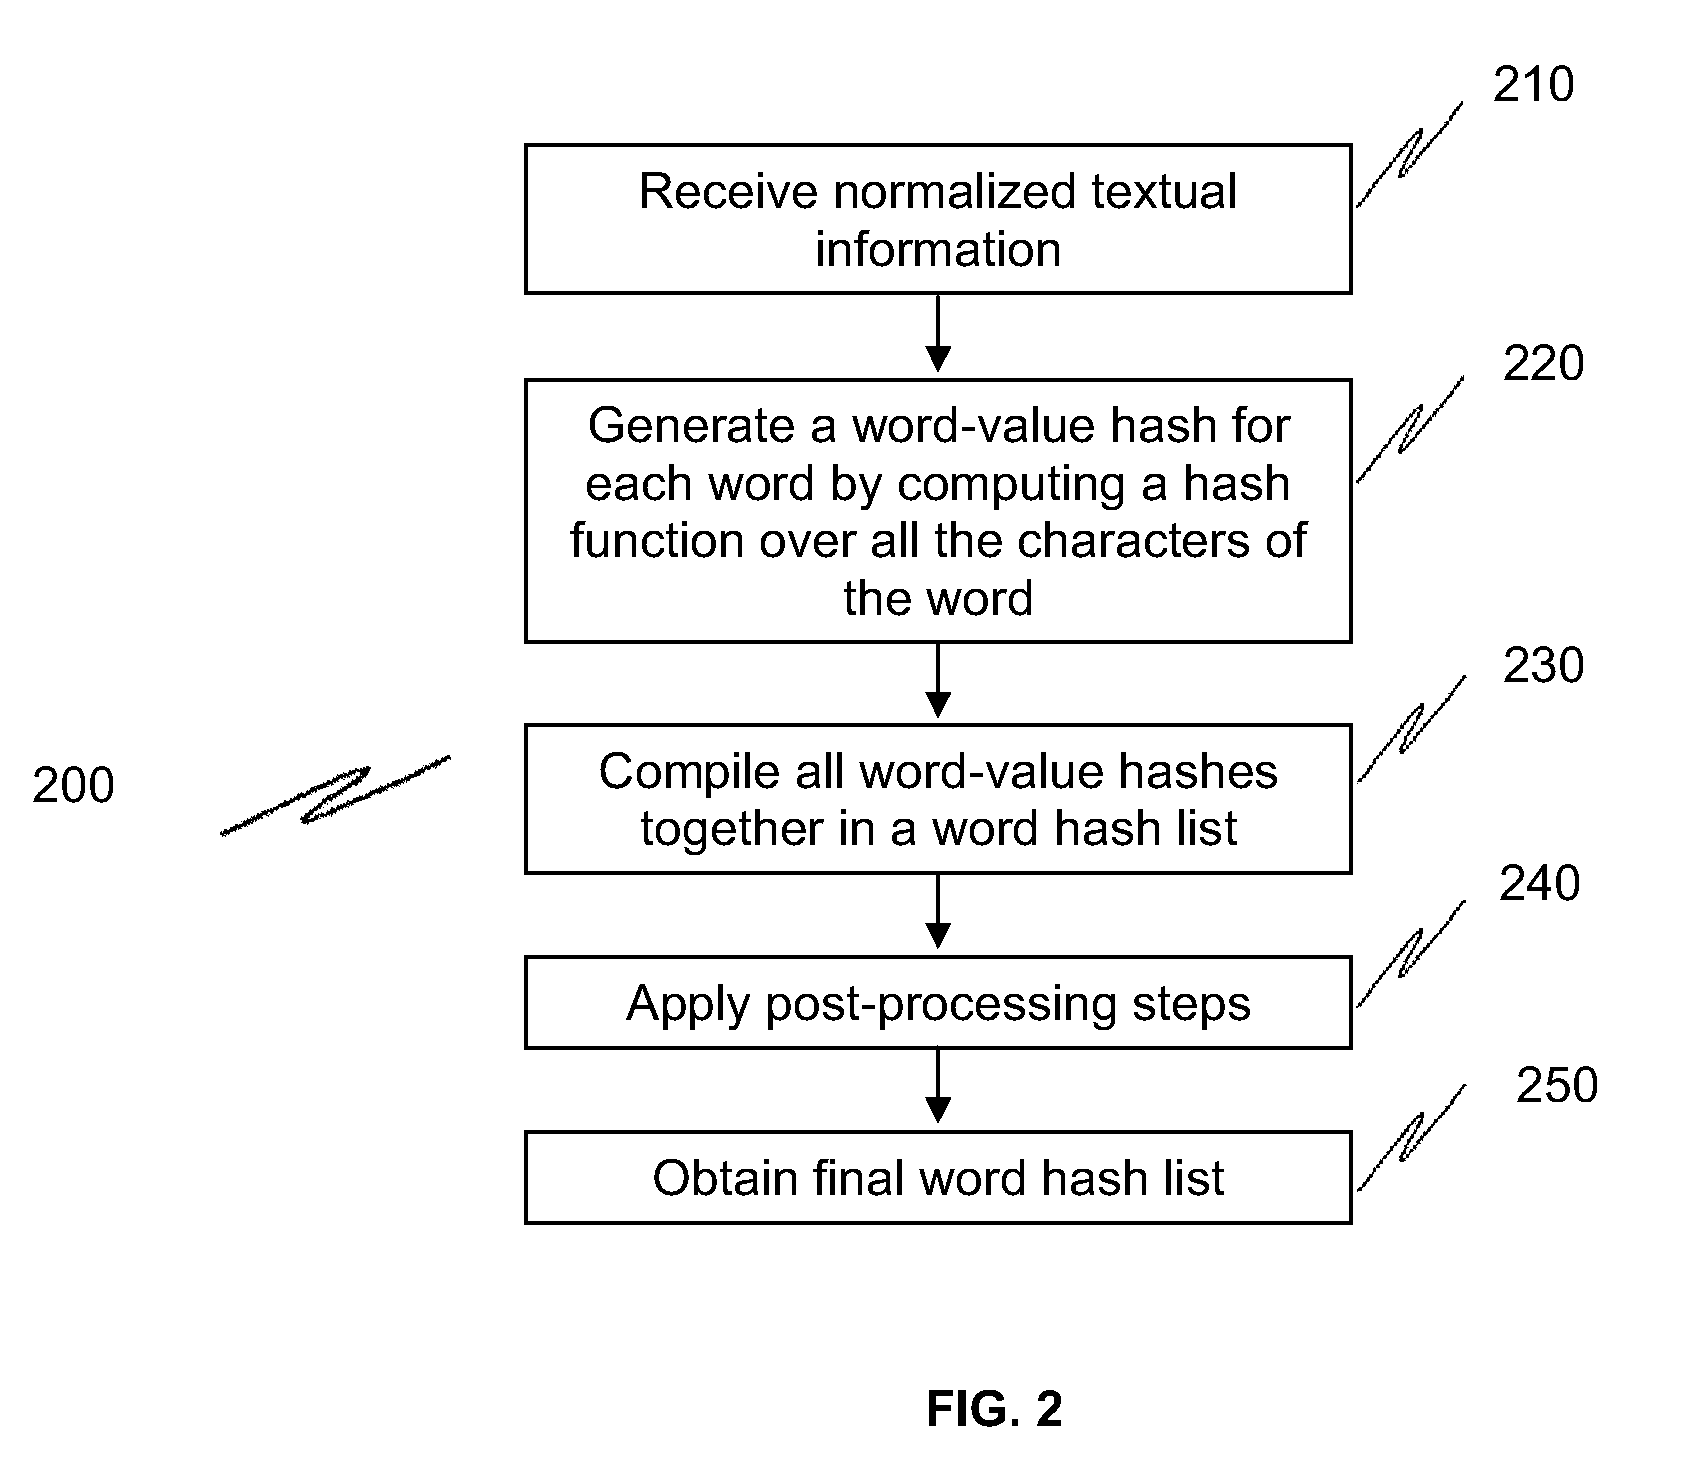 Methods and systems to fingerprint textual information using word runs